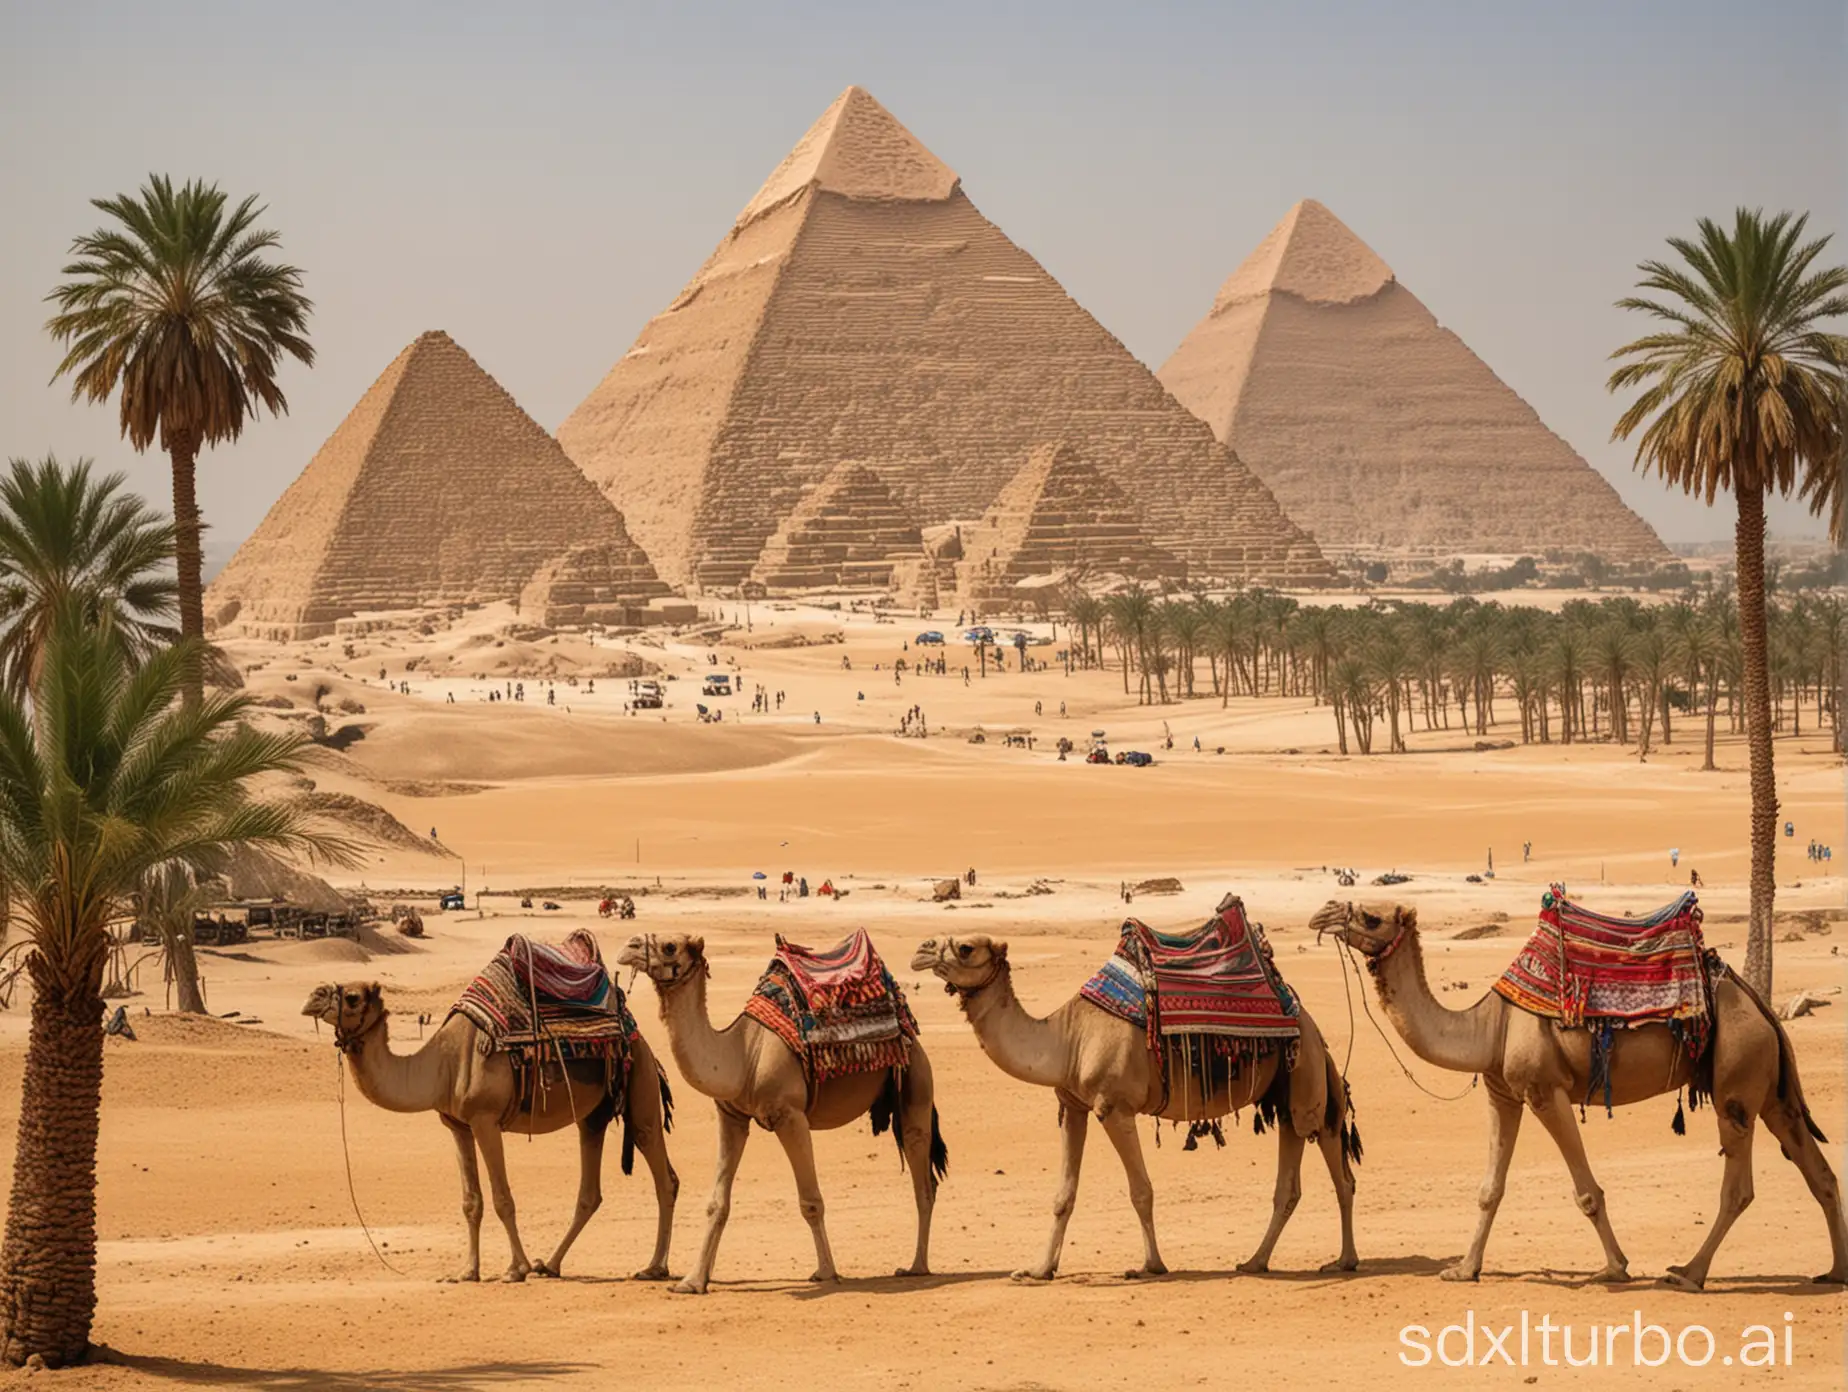 Pyramids-of-Giza-with-Camel-Caravan-and-Oasis